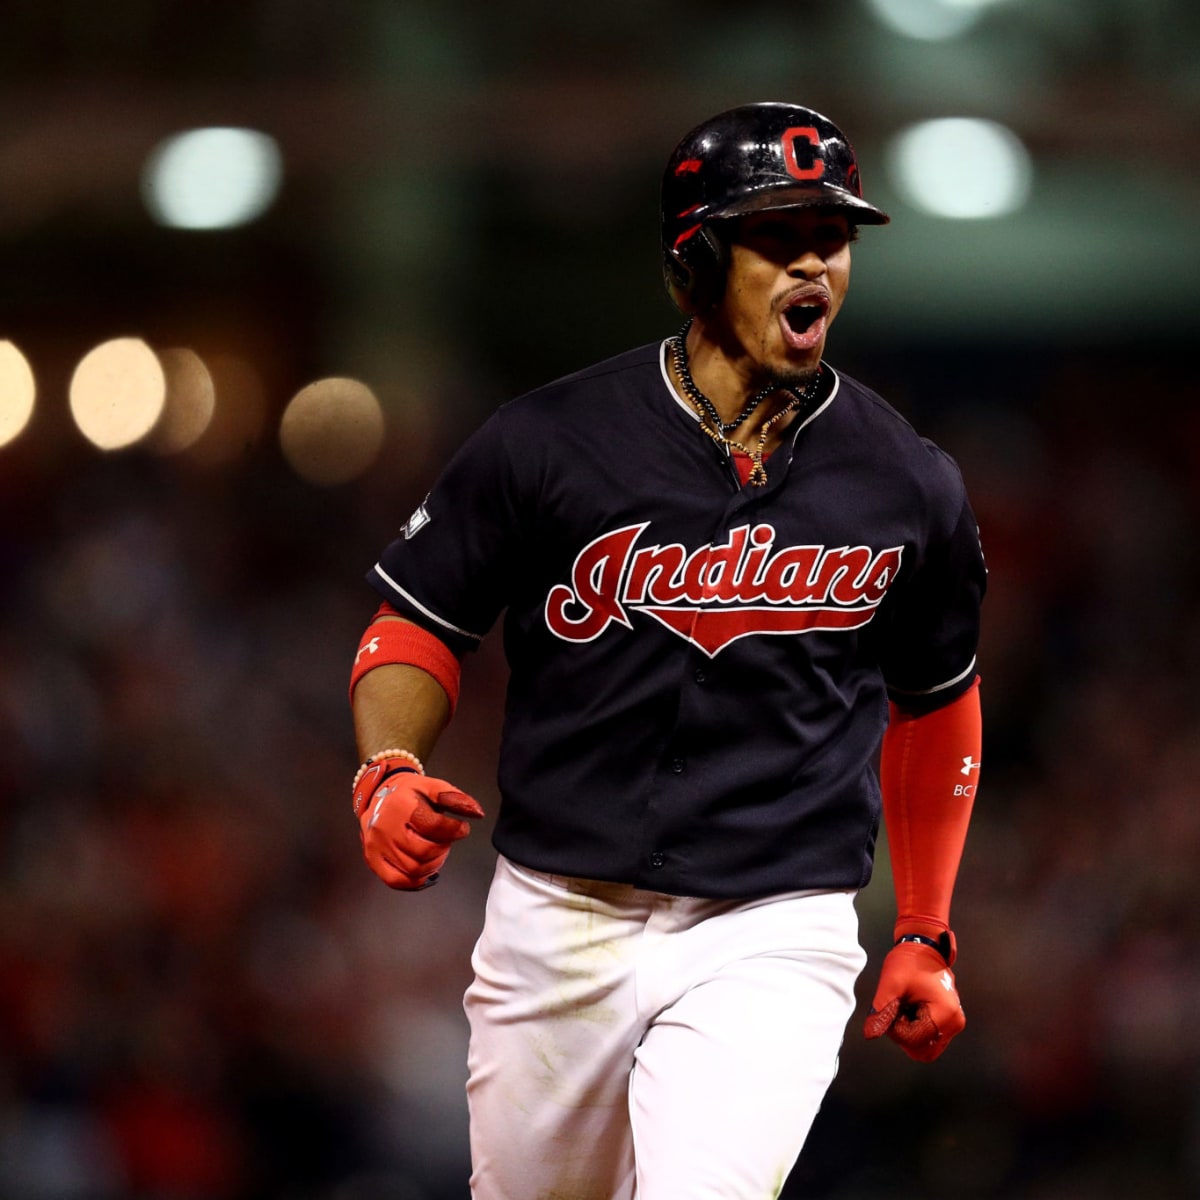 The Mets Have Reportedly Offered Francisco Lindor 10 Years and